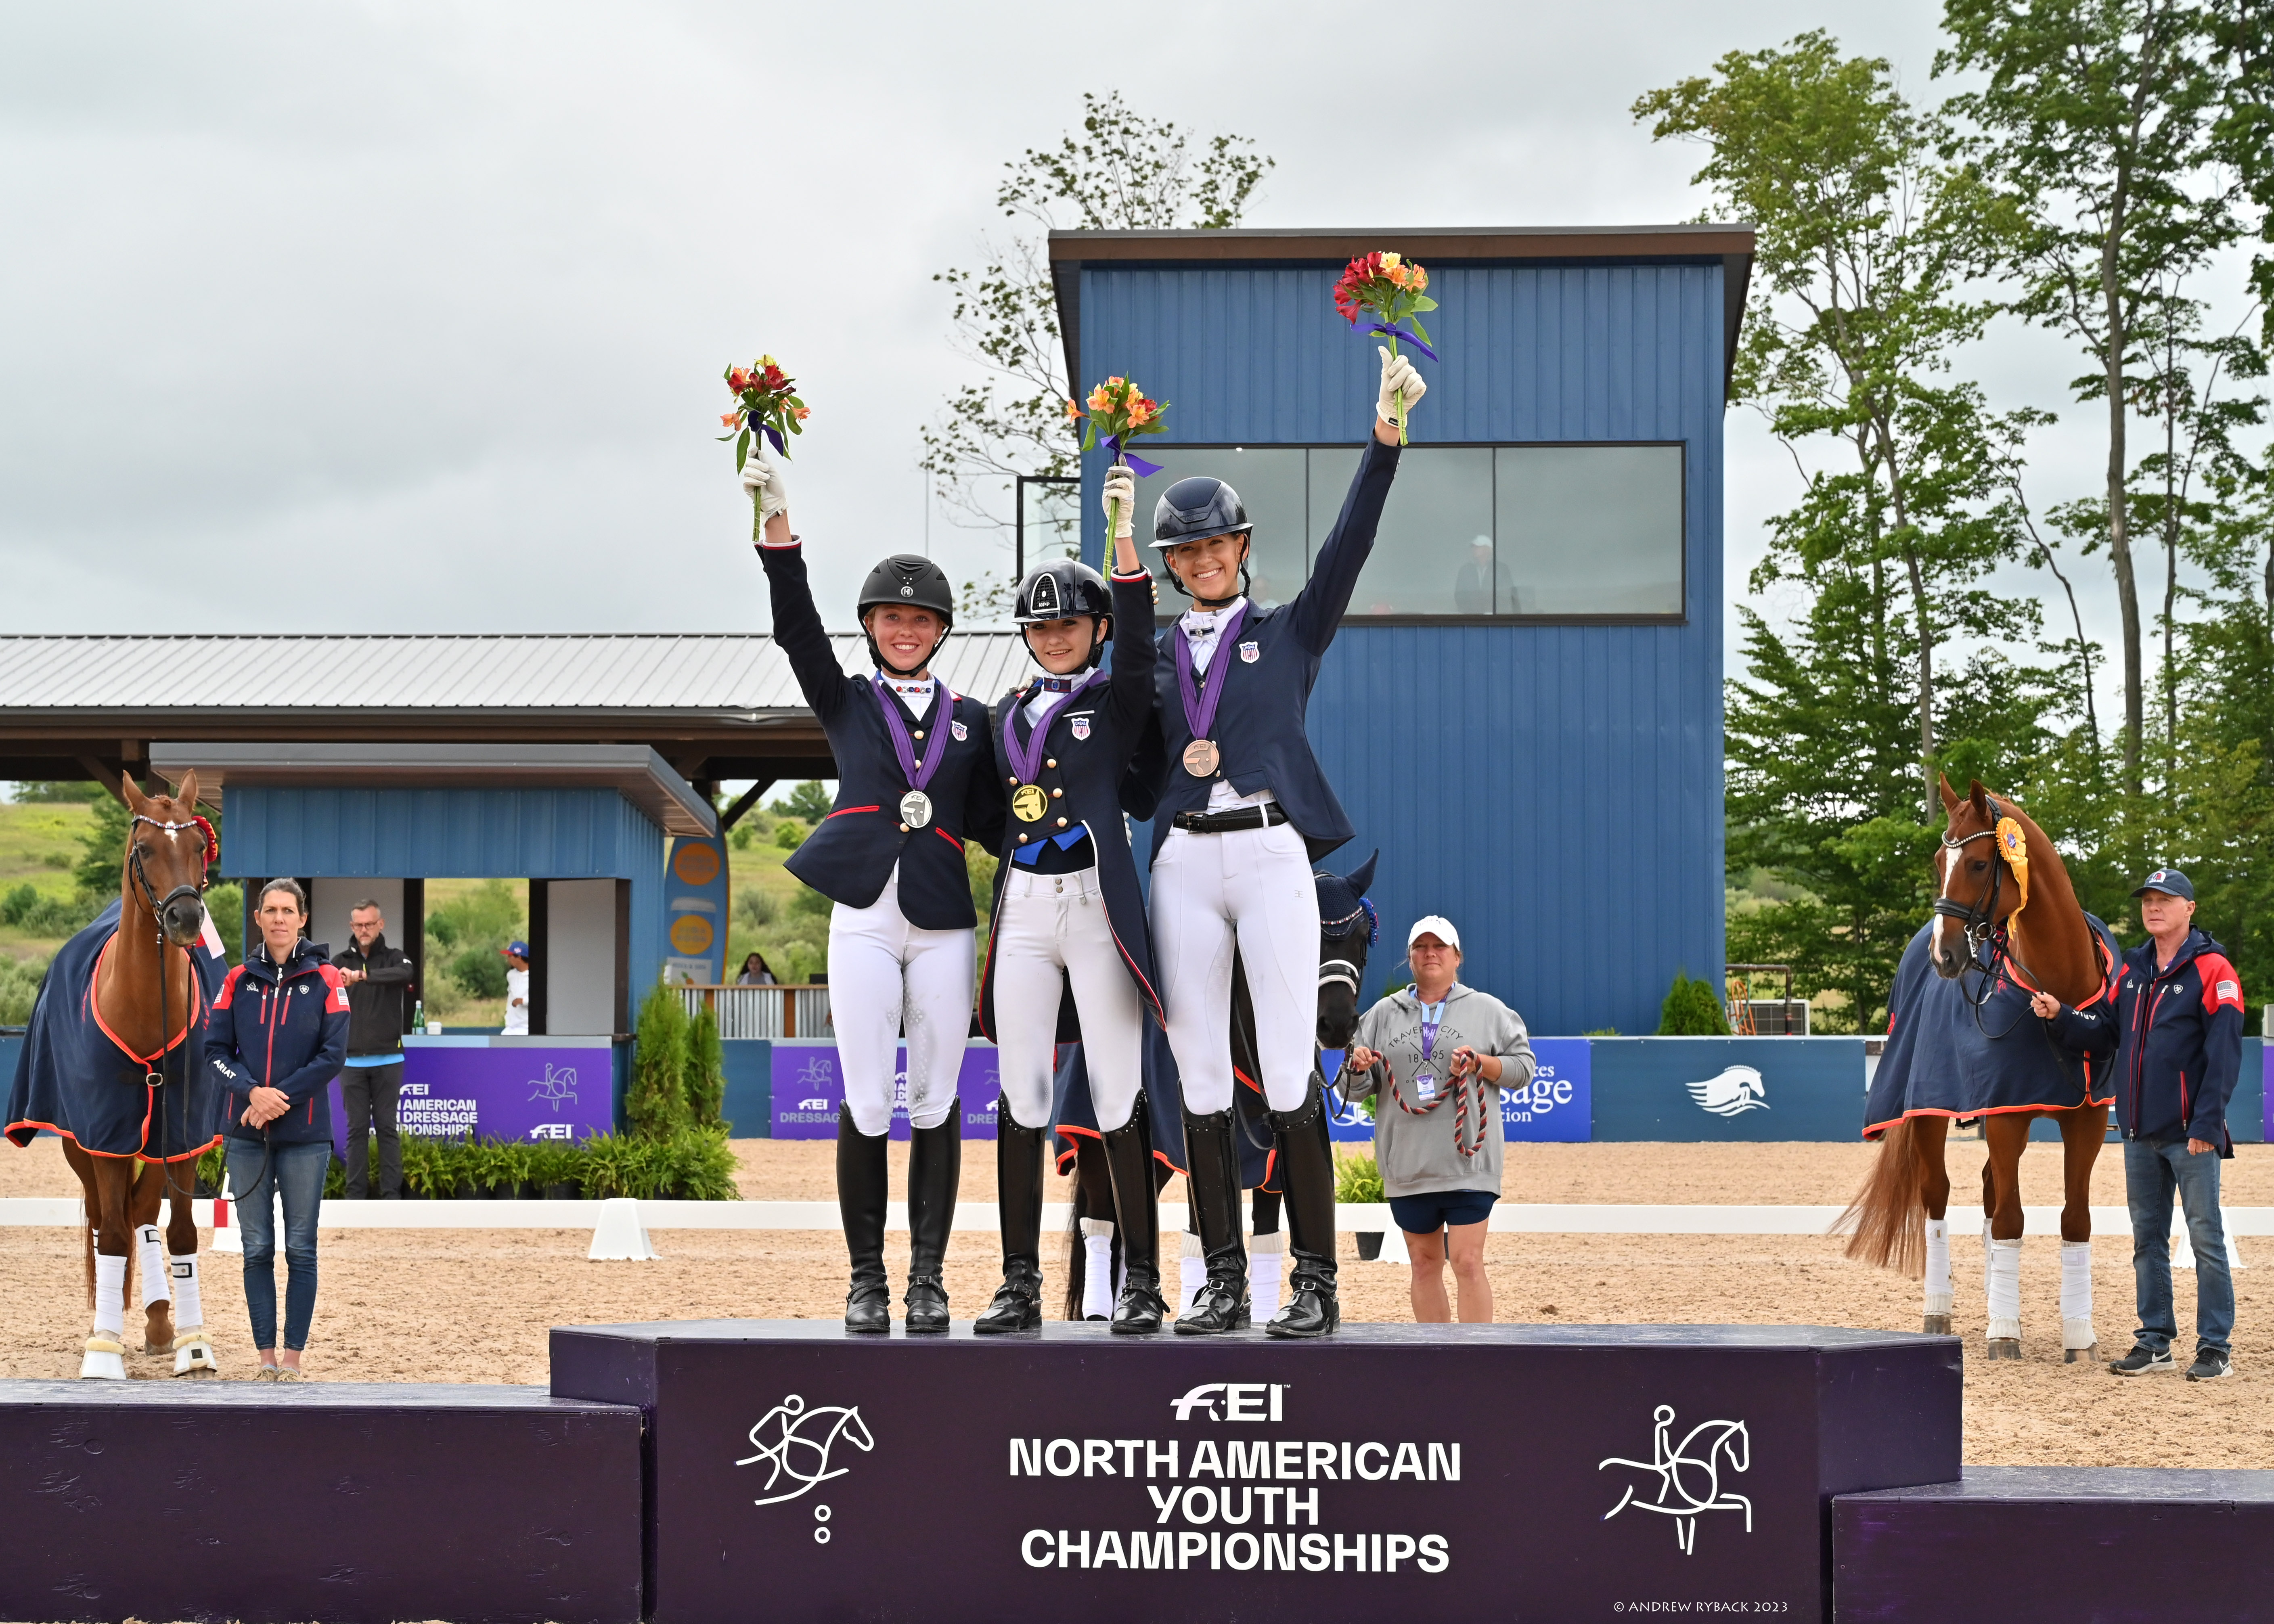 Discover Dressage/FEI North American Youth Dressage Championship